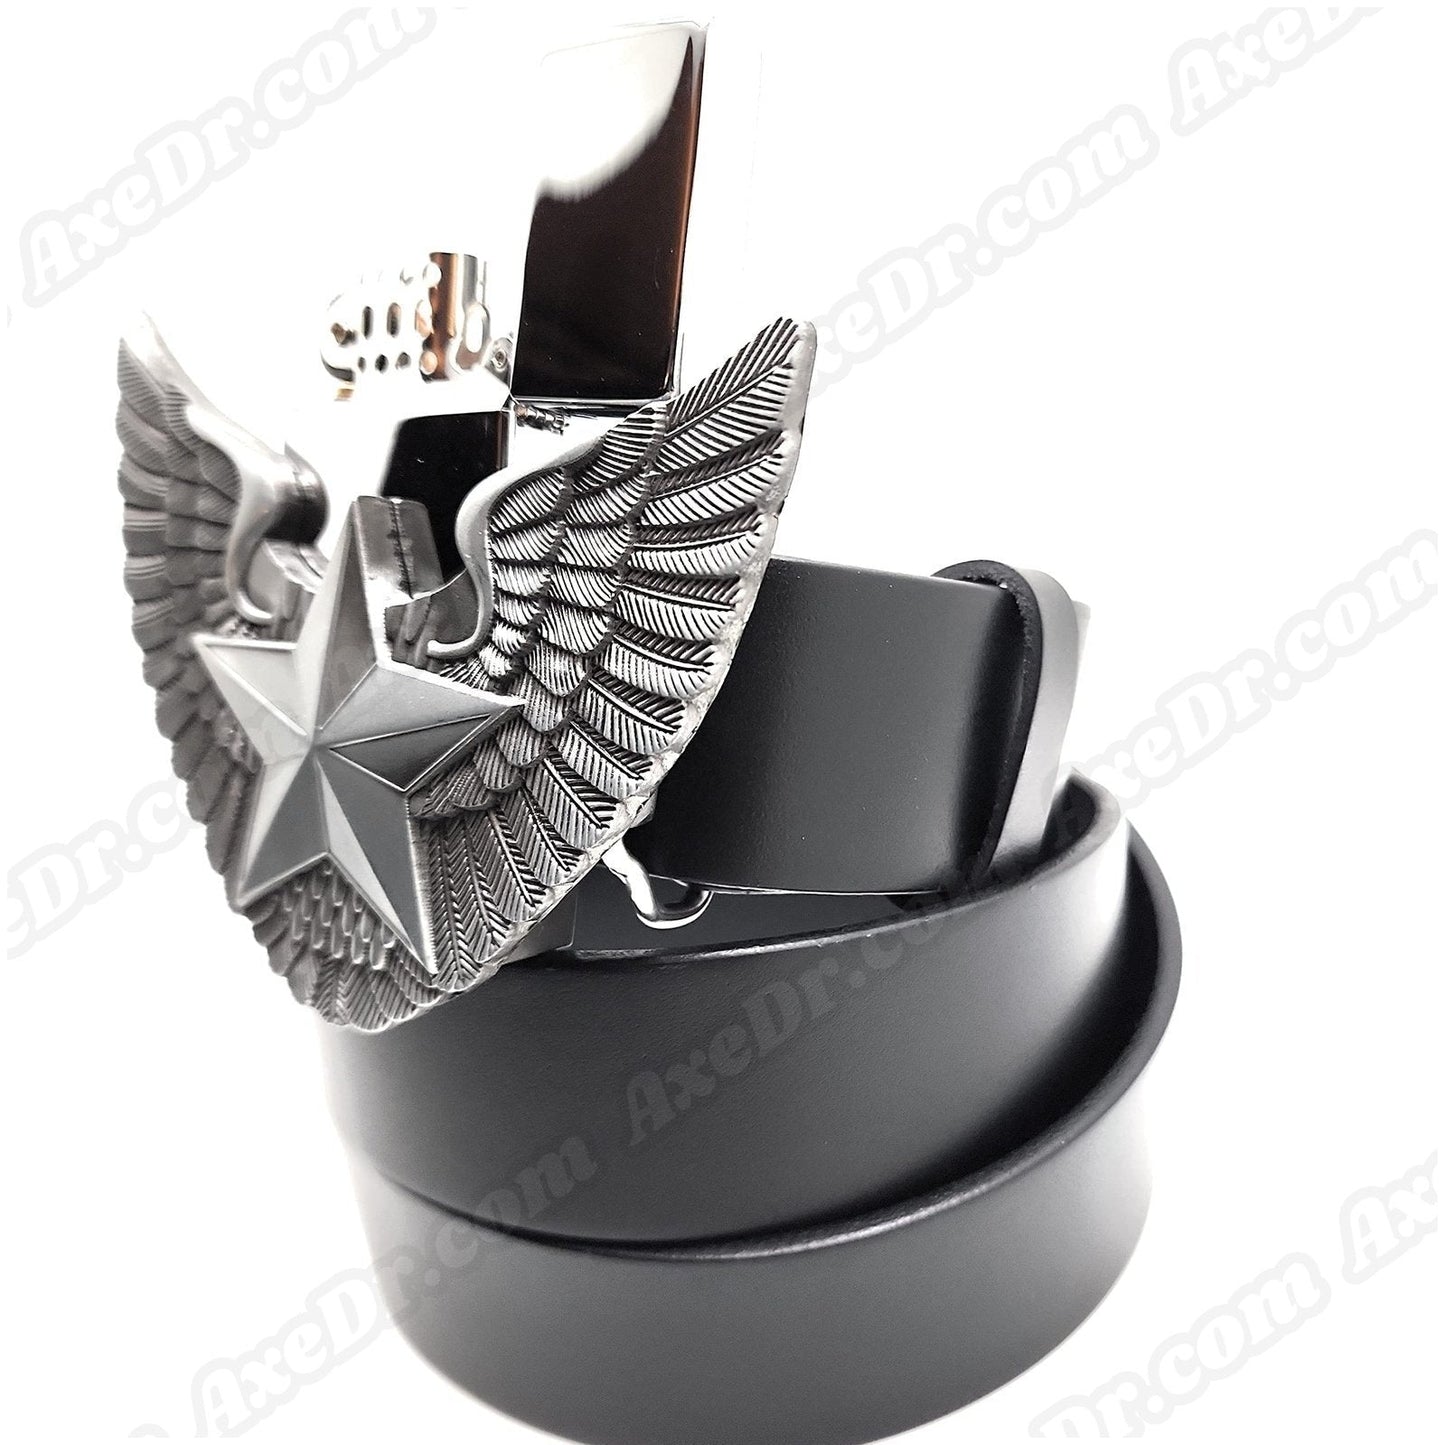 Nautical Star Wings Lighter Belt Buckle and Genuine Leather Belt shop.AxeDr.com 